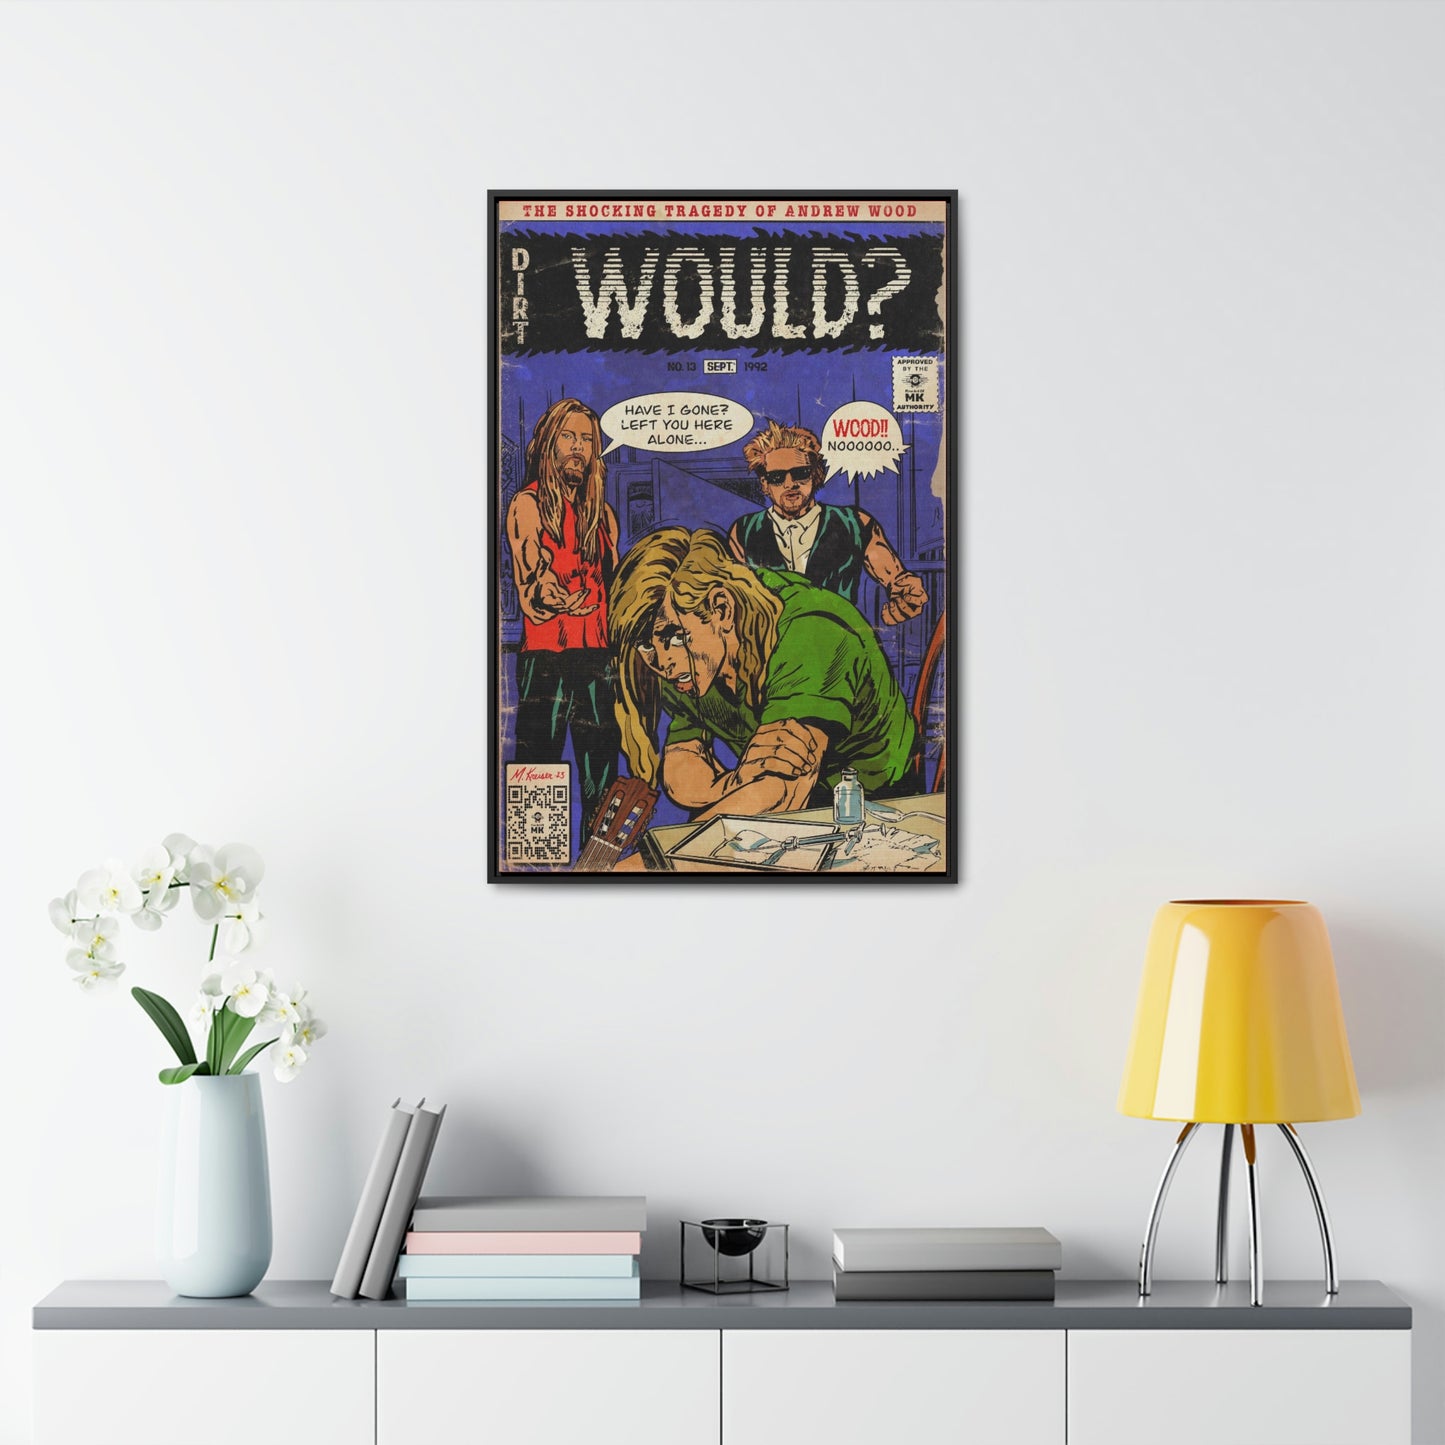 Alice In Chains - Would? - Gallery Canvas Wraps, Vertical Frame